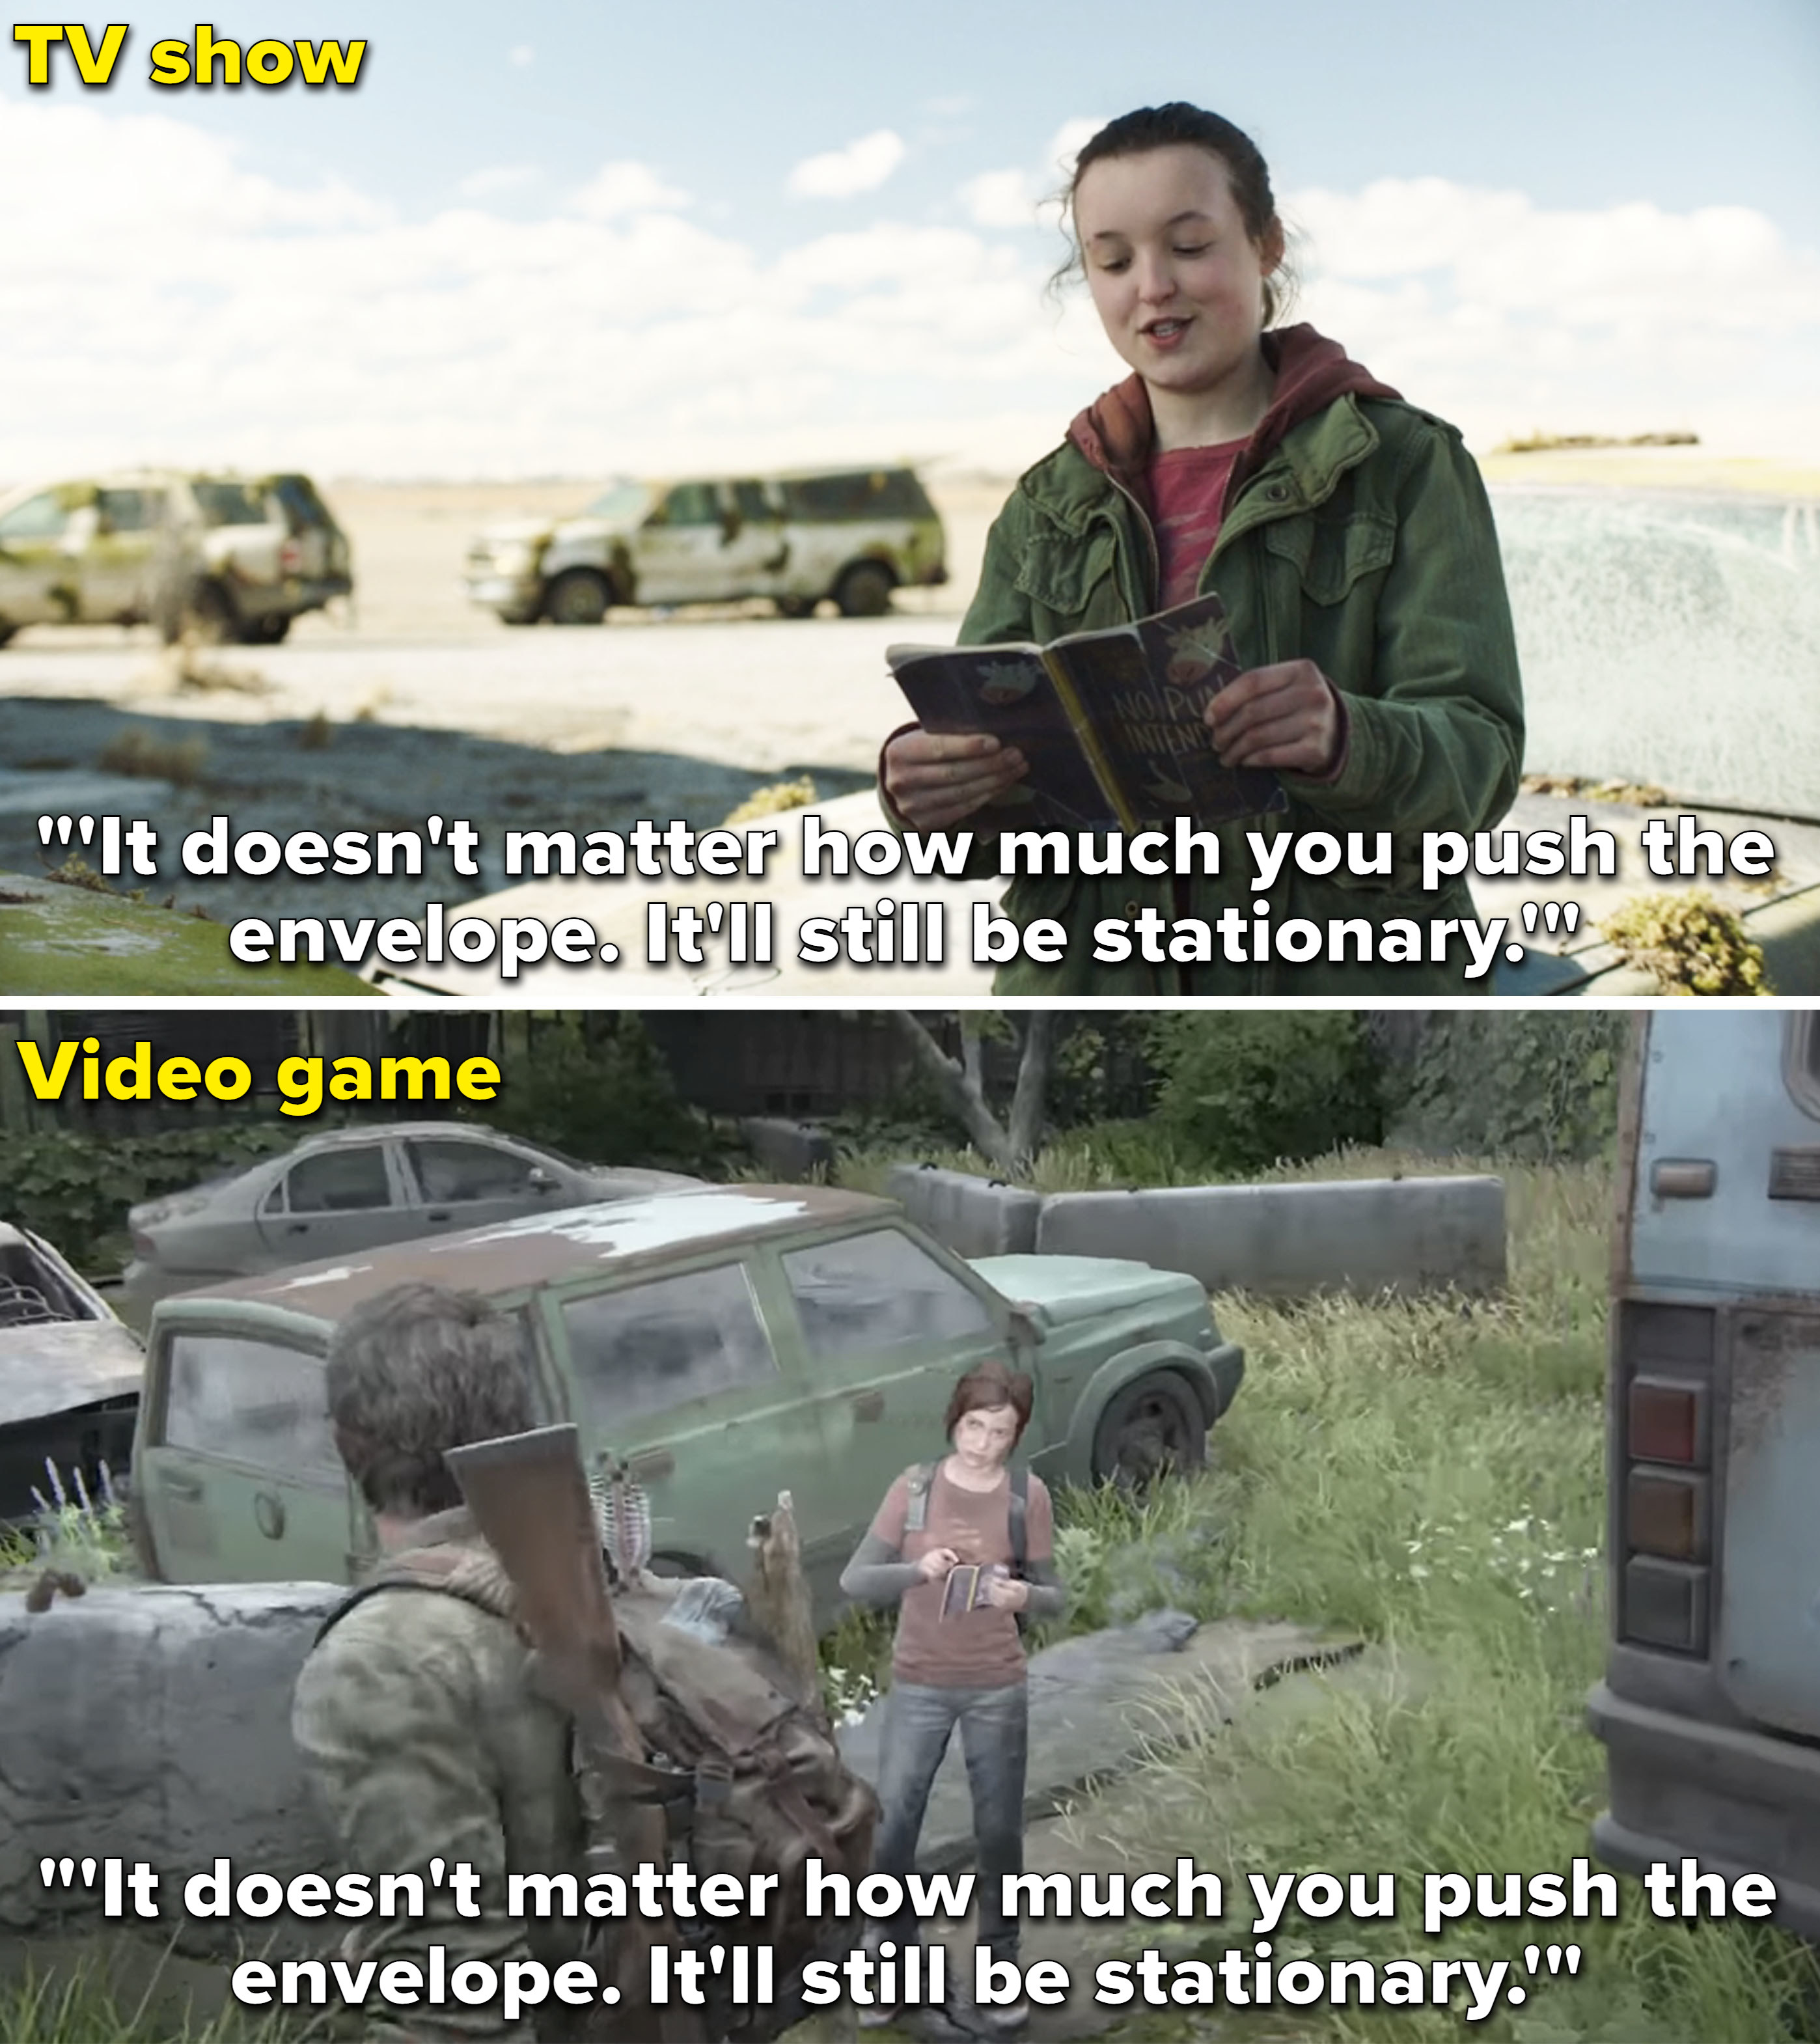 Ellie saying, &quot;It doesn&#x27;t matter how much you push the envelope. It&#x27;ll still be stationary&quot; in the show vs game